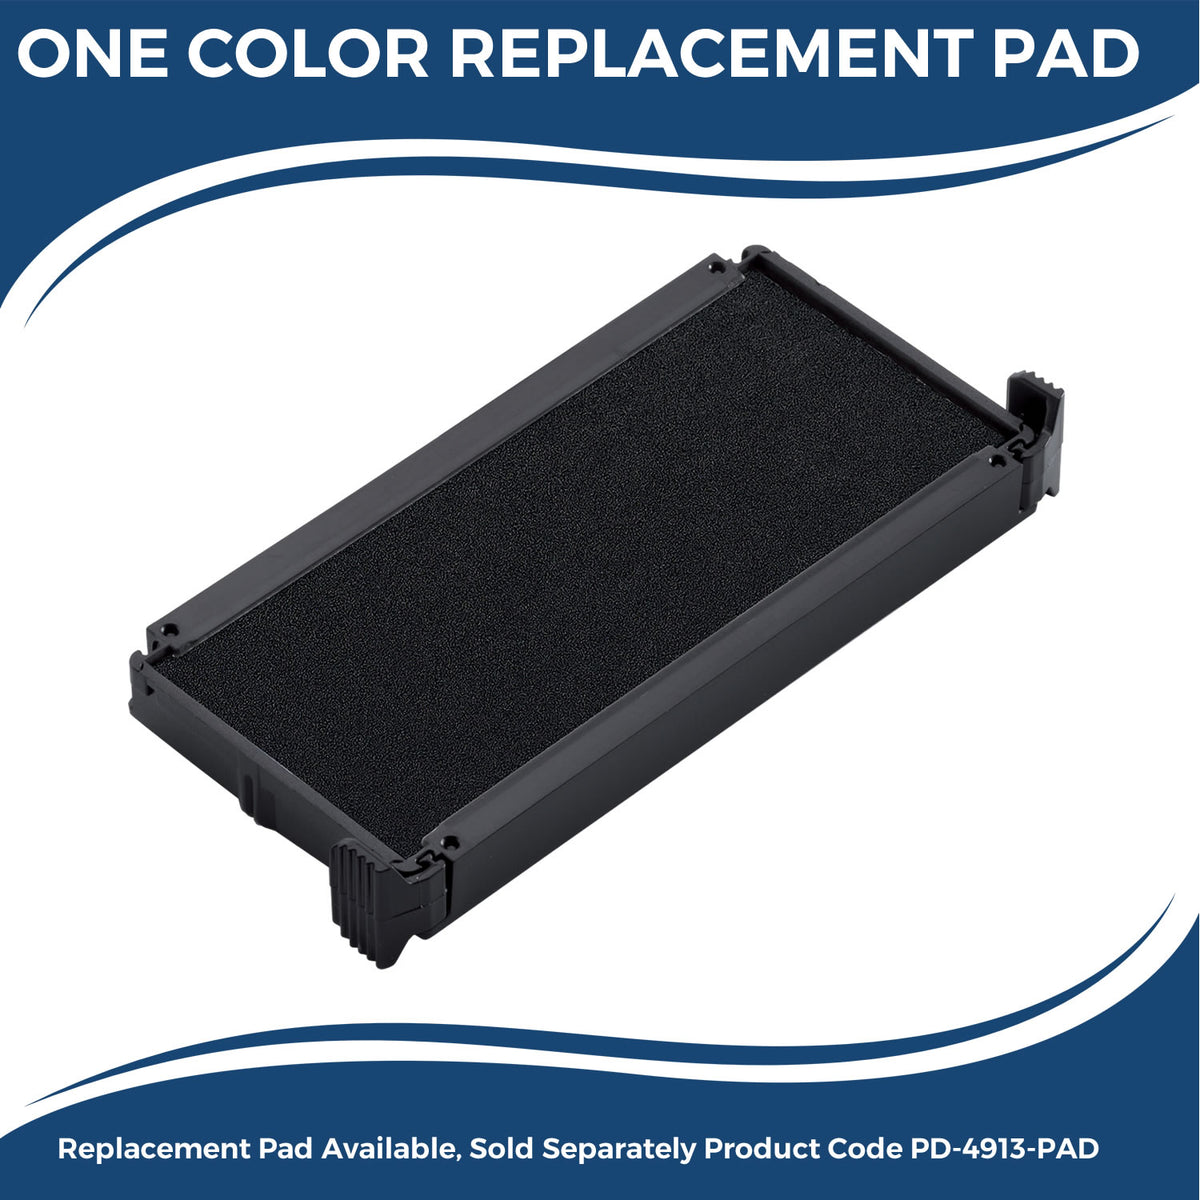 Large Self Inking Storage Stamp 4627S Large Replacment Pad